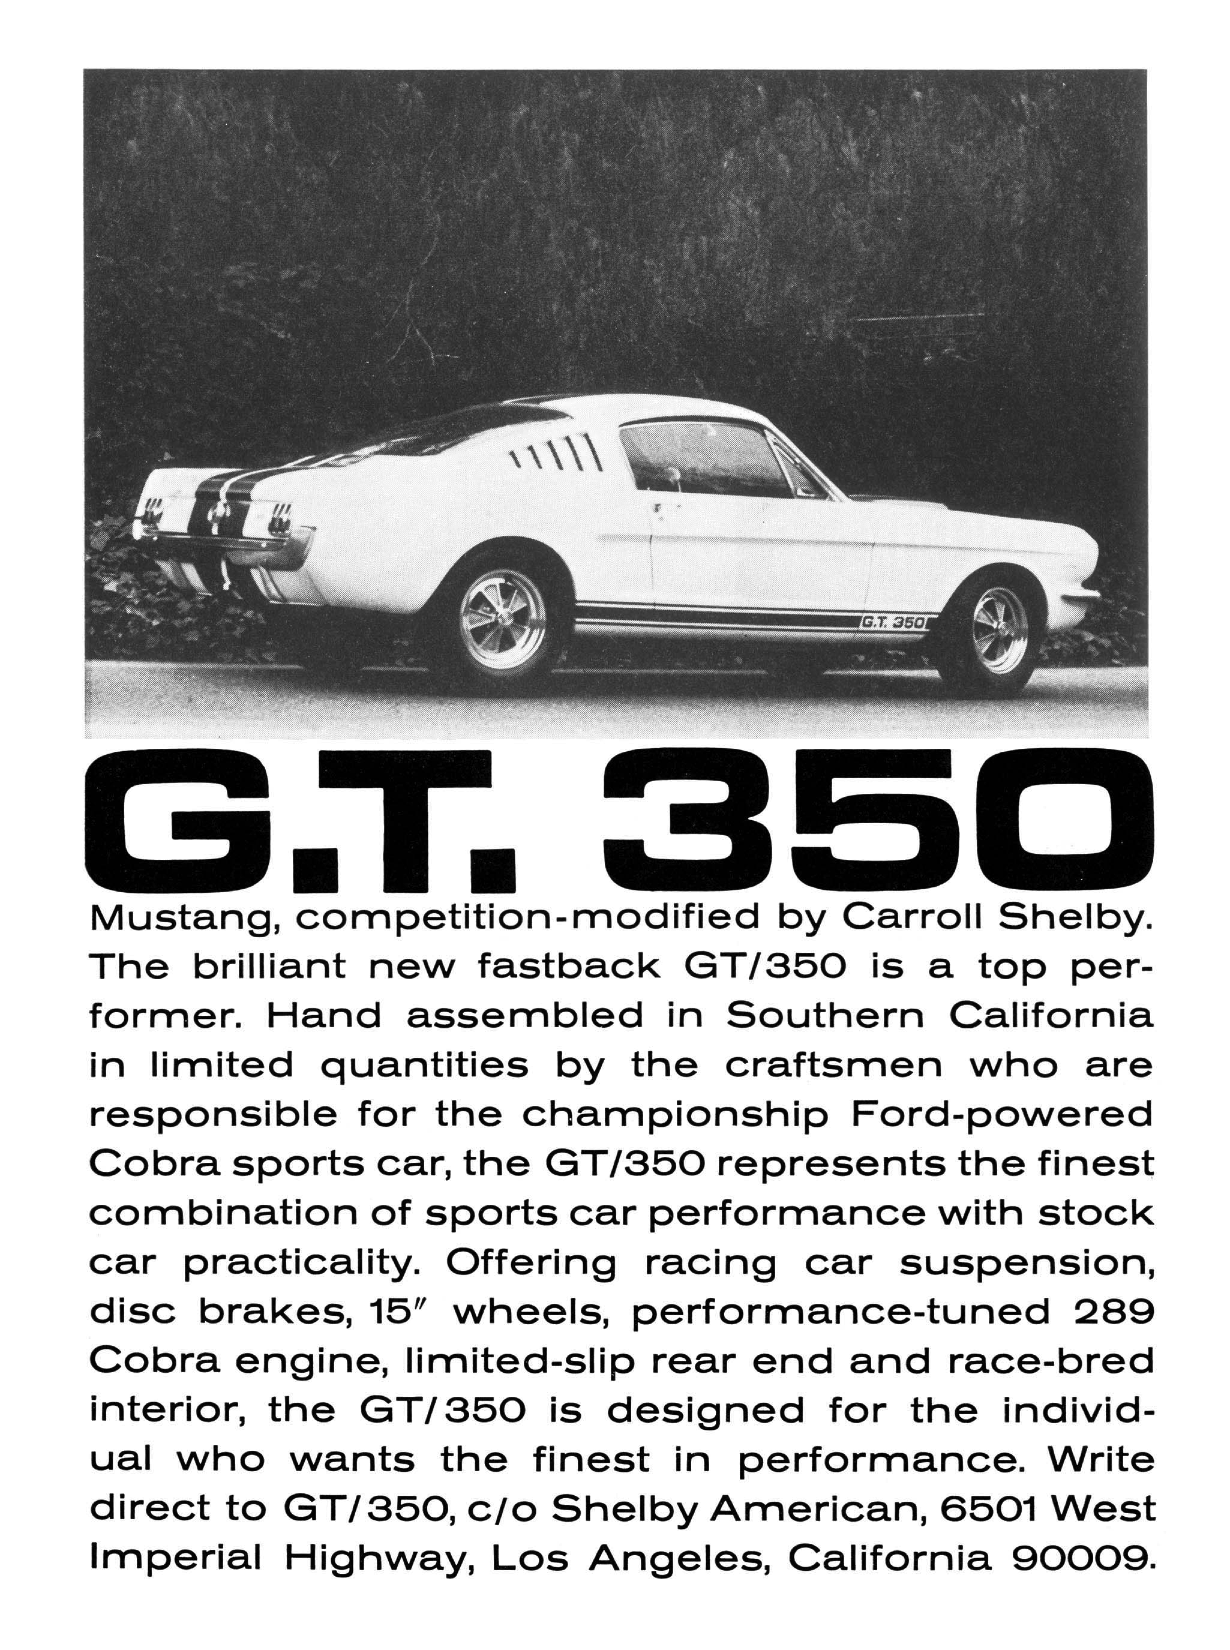 1965 Shelby Ford GT350 "Hand assembled in California"